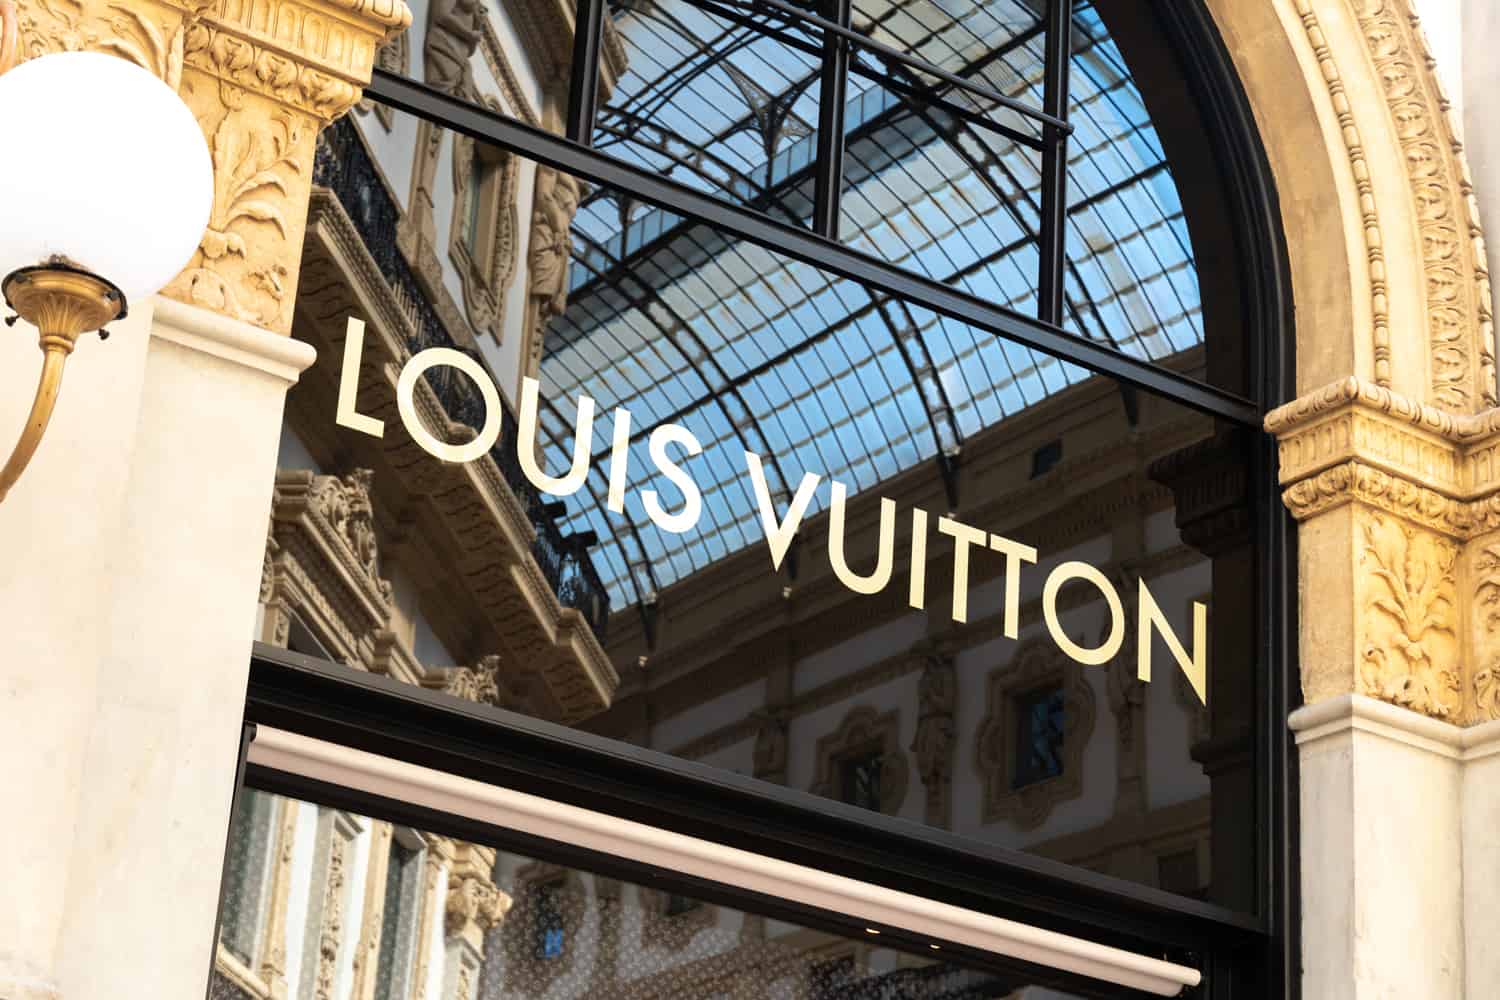 The @louisvuitton cafe is a temporary pop up in Paris offering a